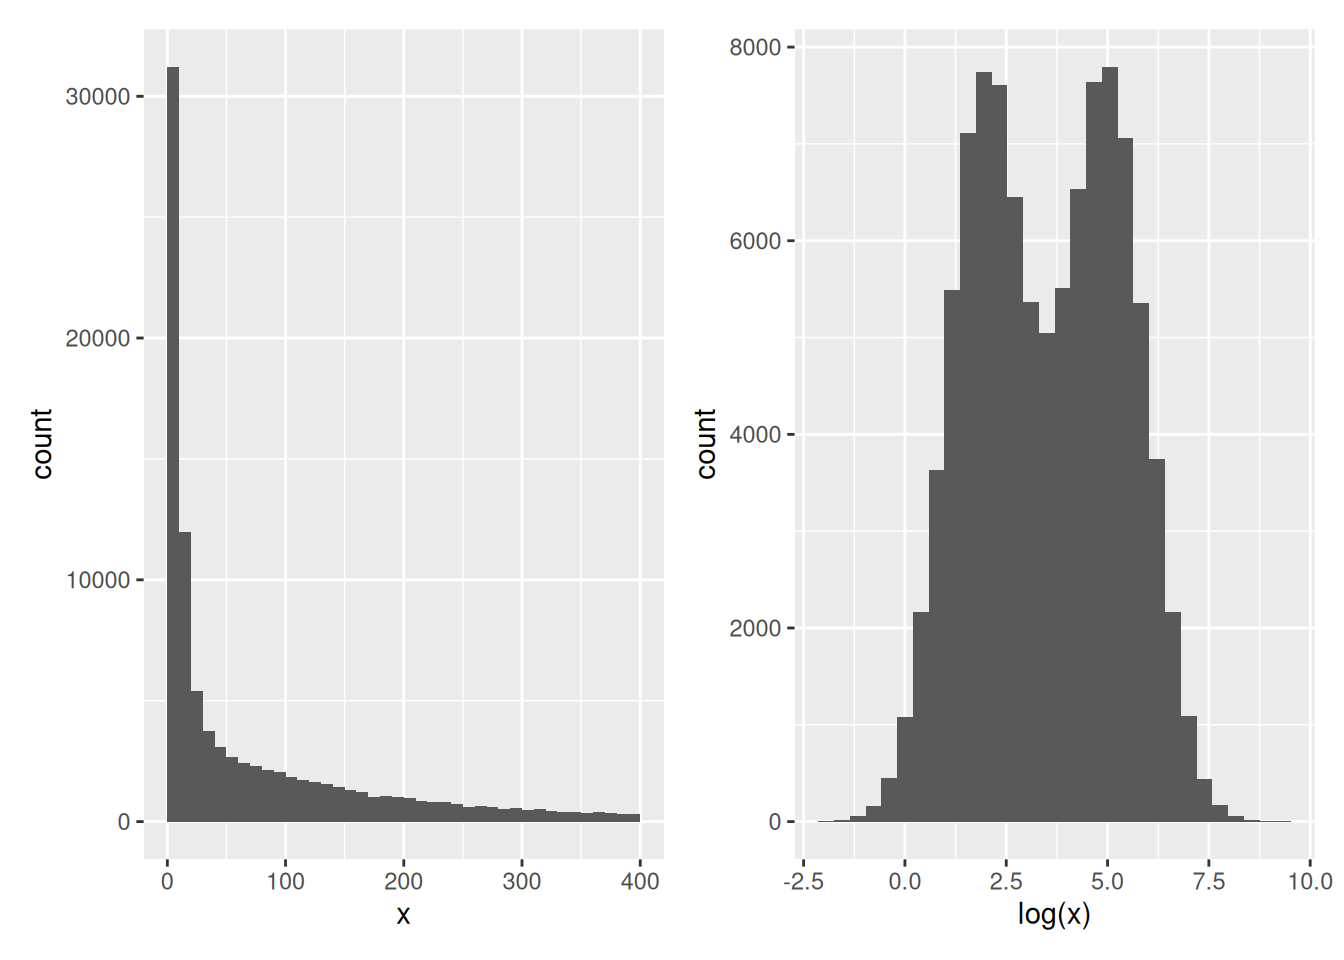 Histograms of the same data without (left) and with (right) log-transformation.